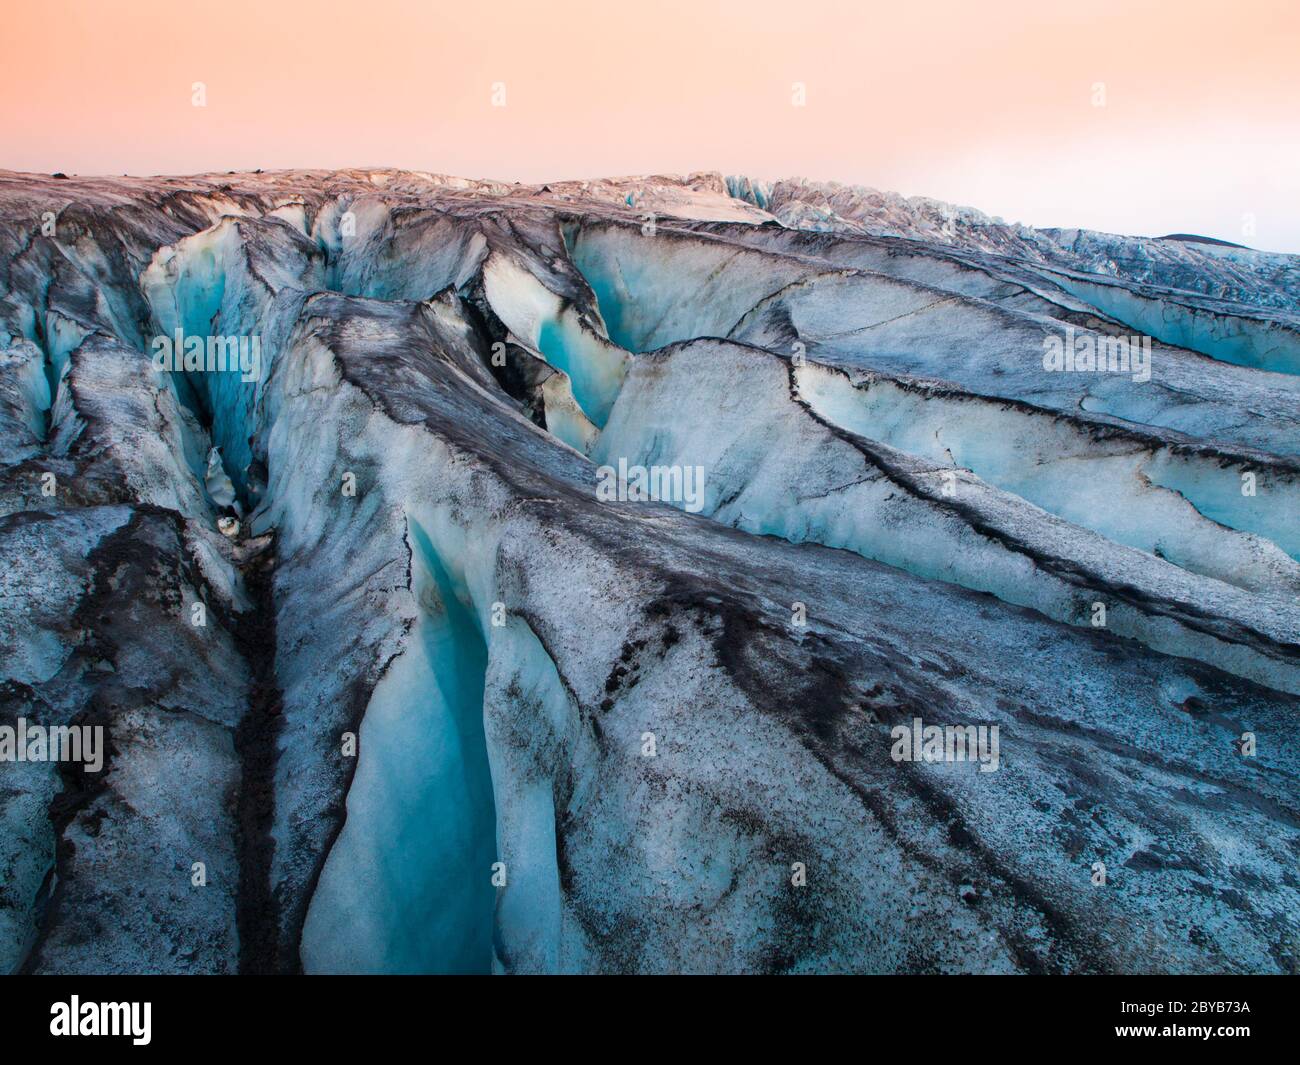 Dirty Glacier High Resolution Stock Photography and Images - Alamy